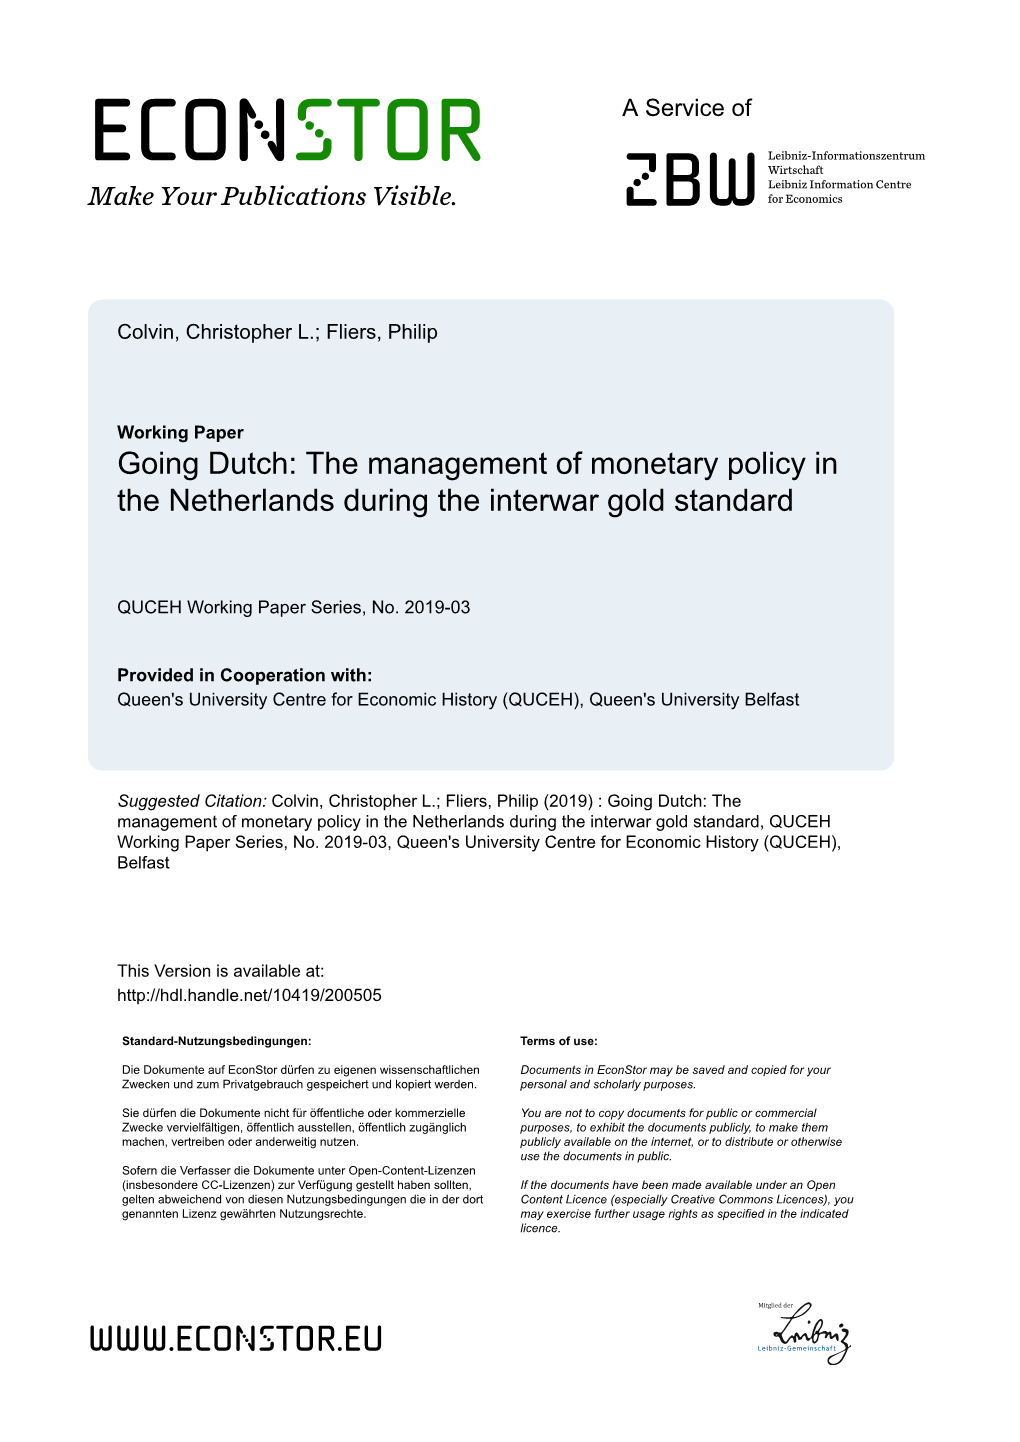 Going Dutch: the Management of Monetary Policy in the Netherlands During the Interwar Gold Standard